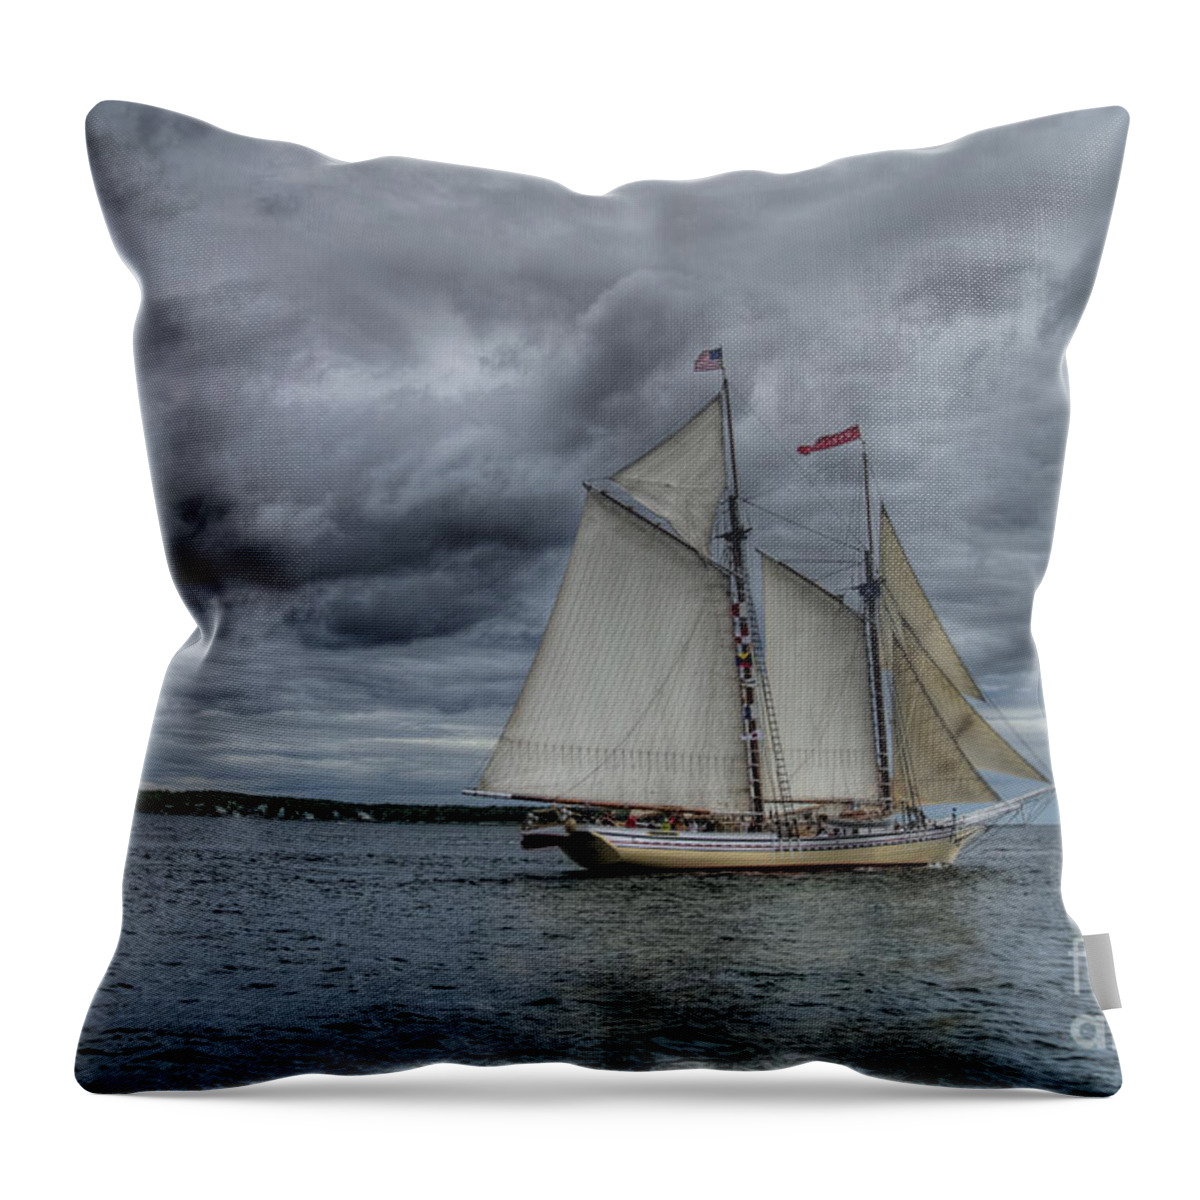 Ship Throw Pillow featuring the photograph Heritage by Alana Ranney